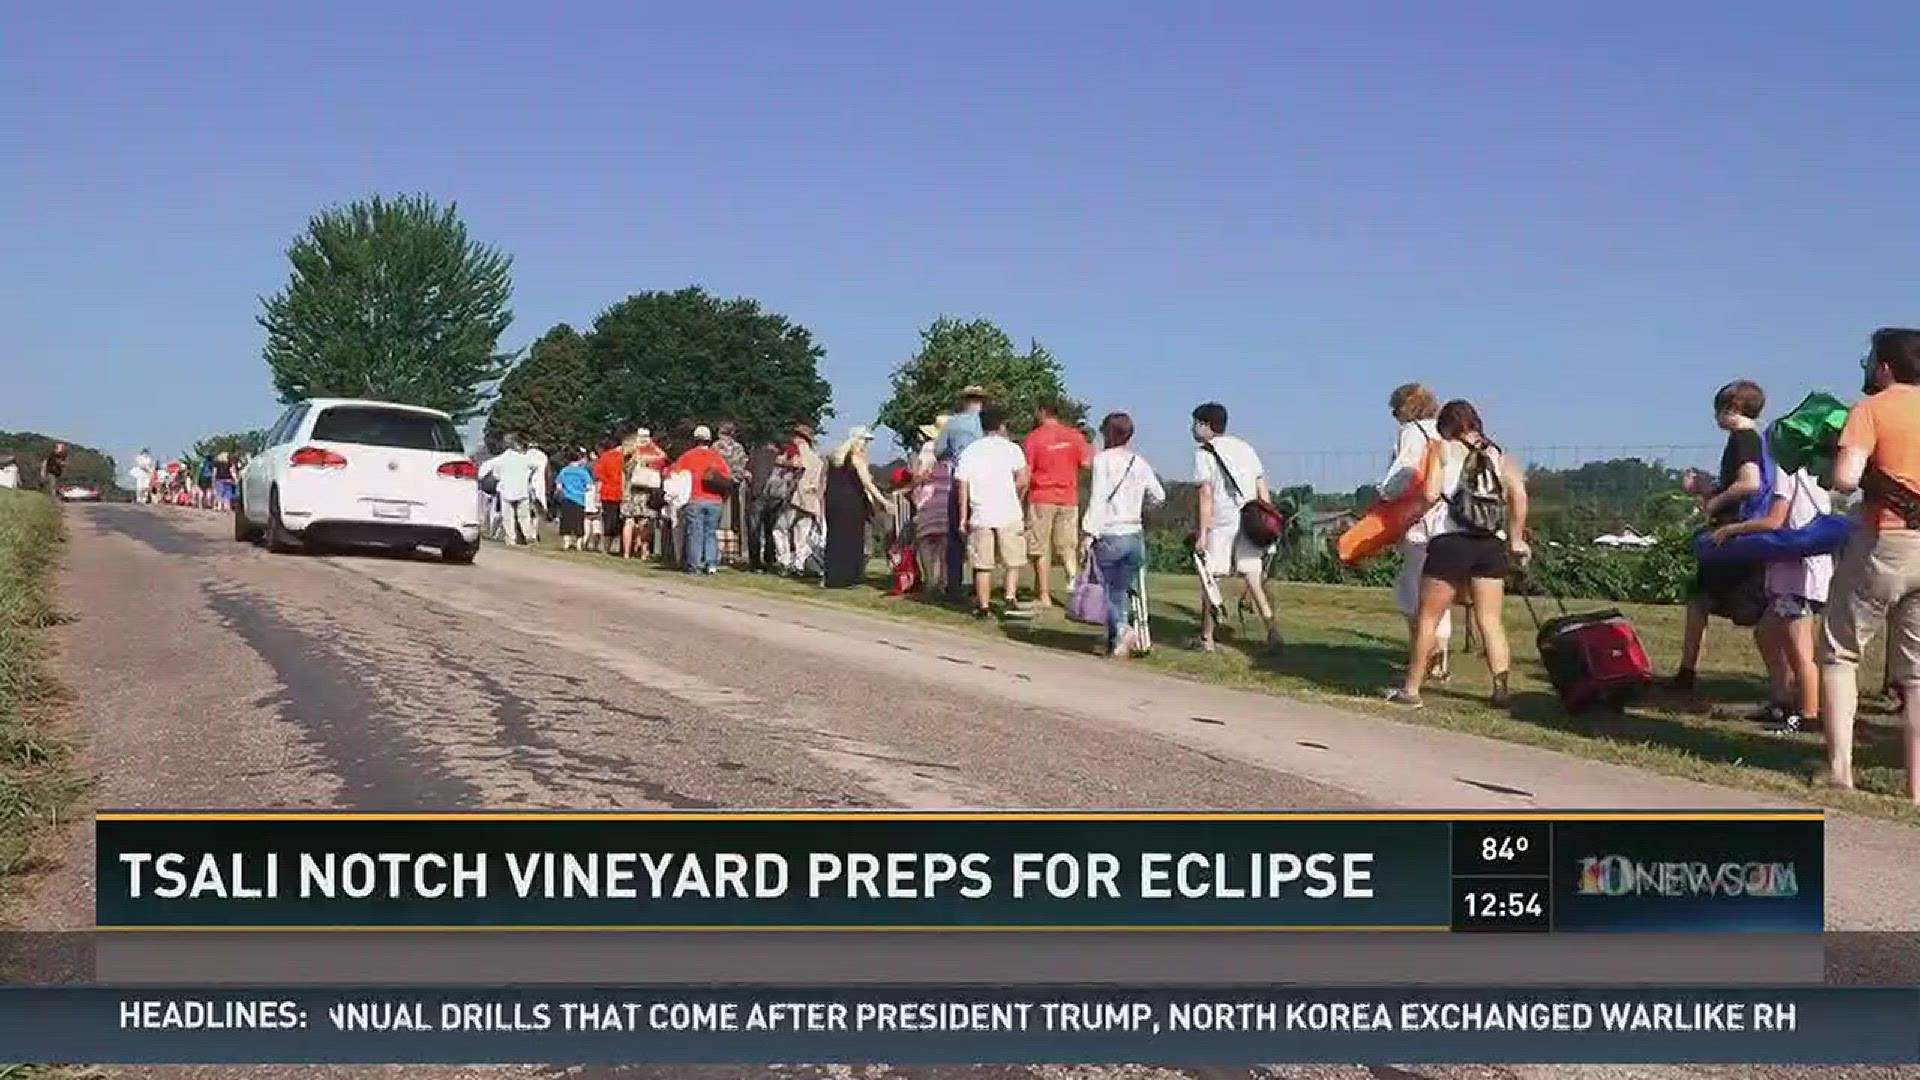 People started lining up at 2:30 a.m. to view the eclipse at Tsali Notch Vineyard.